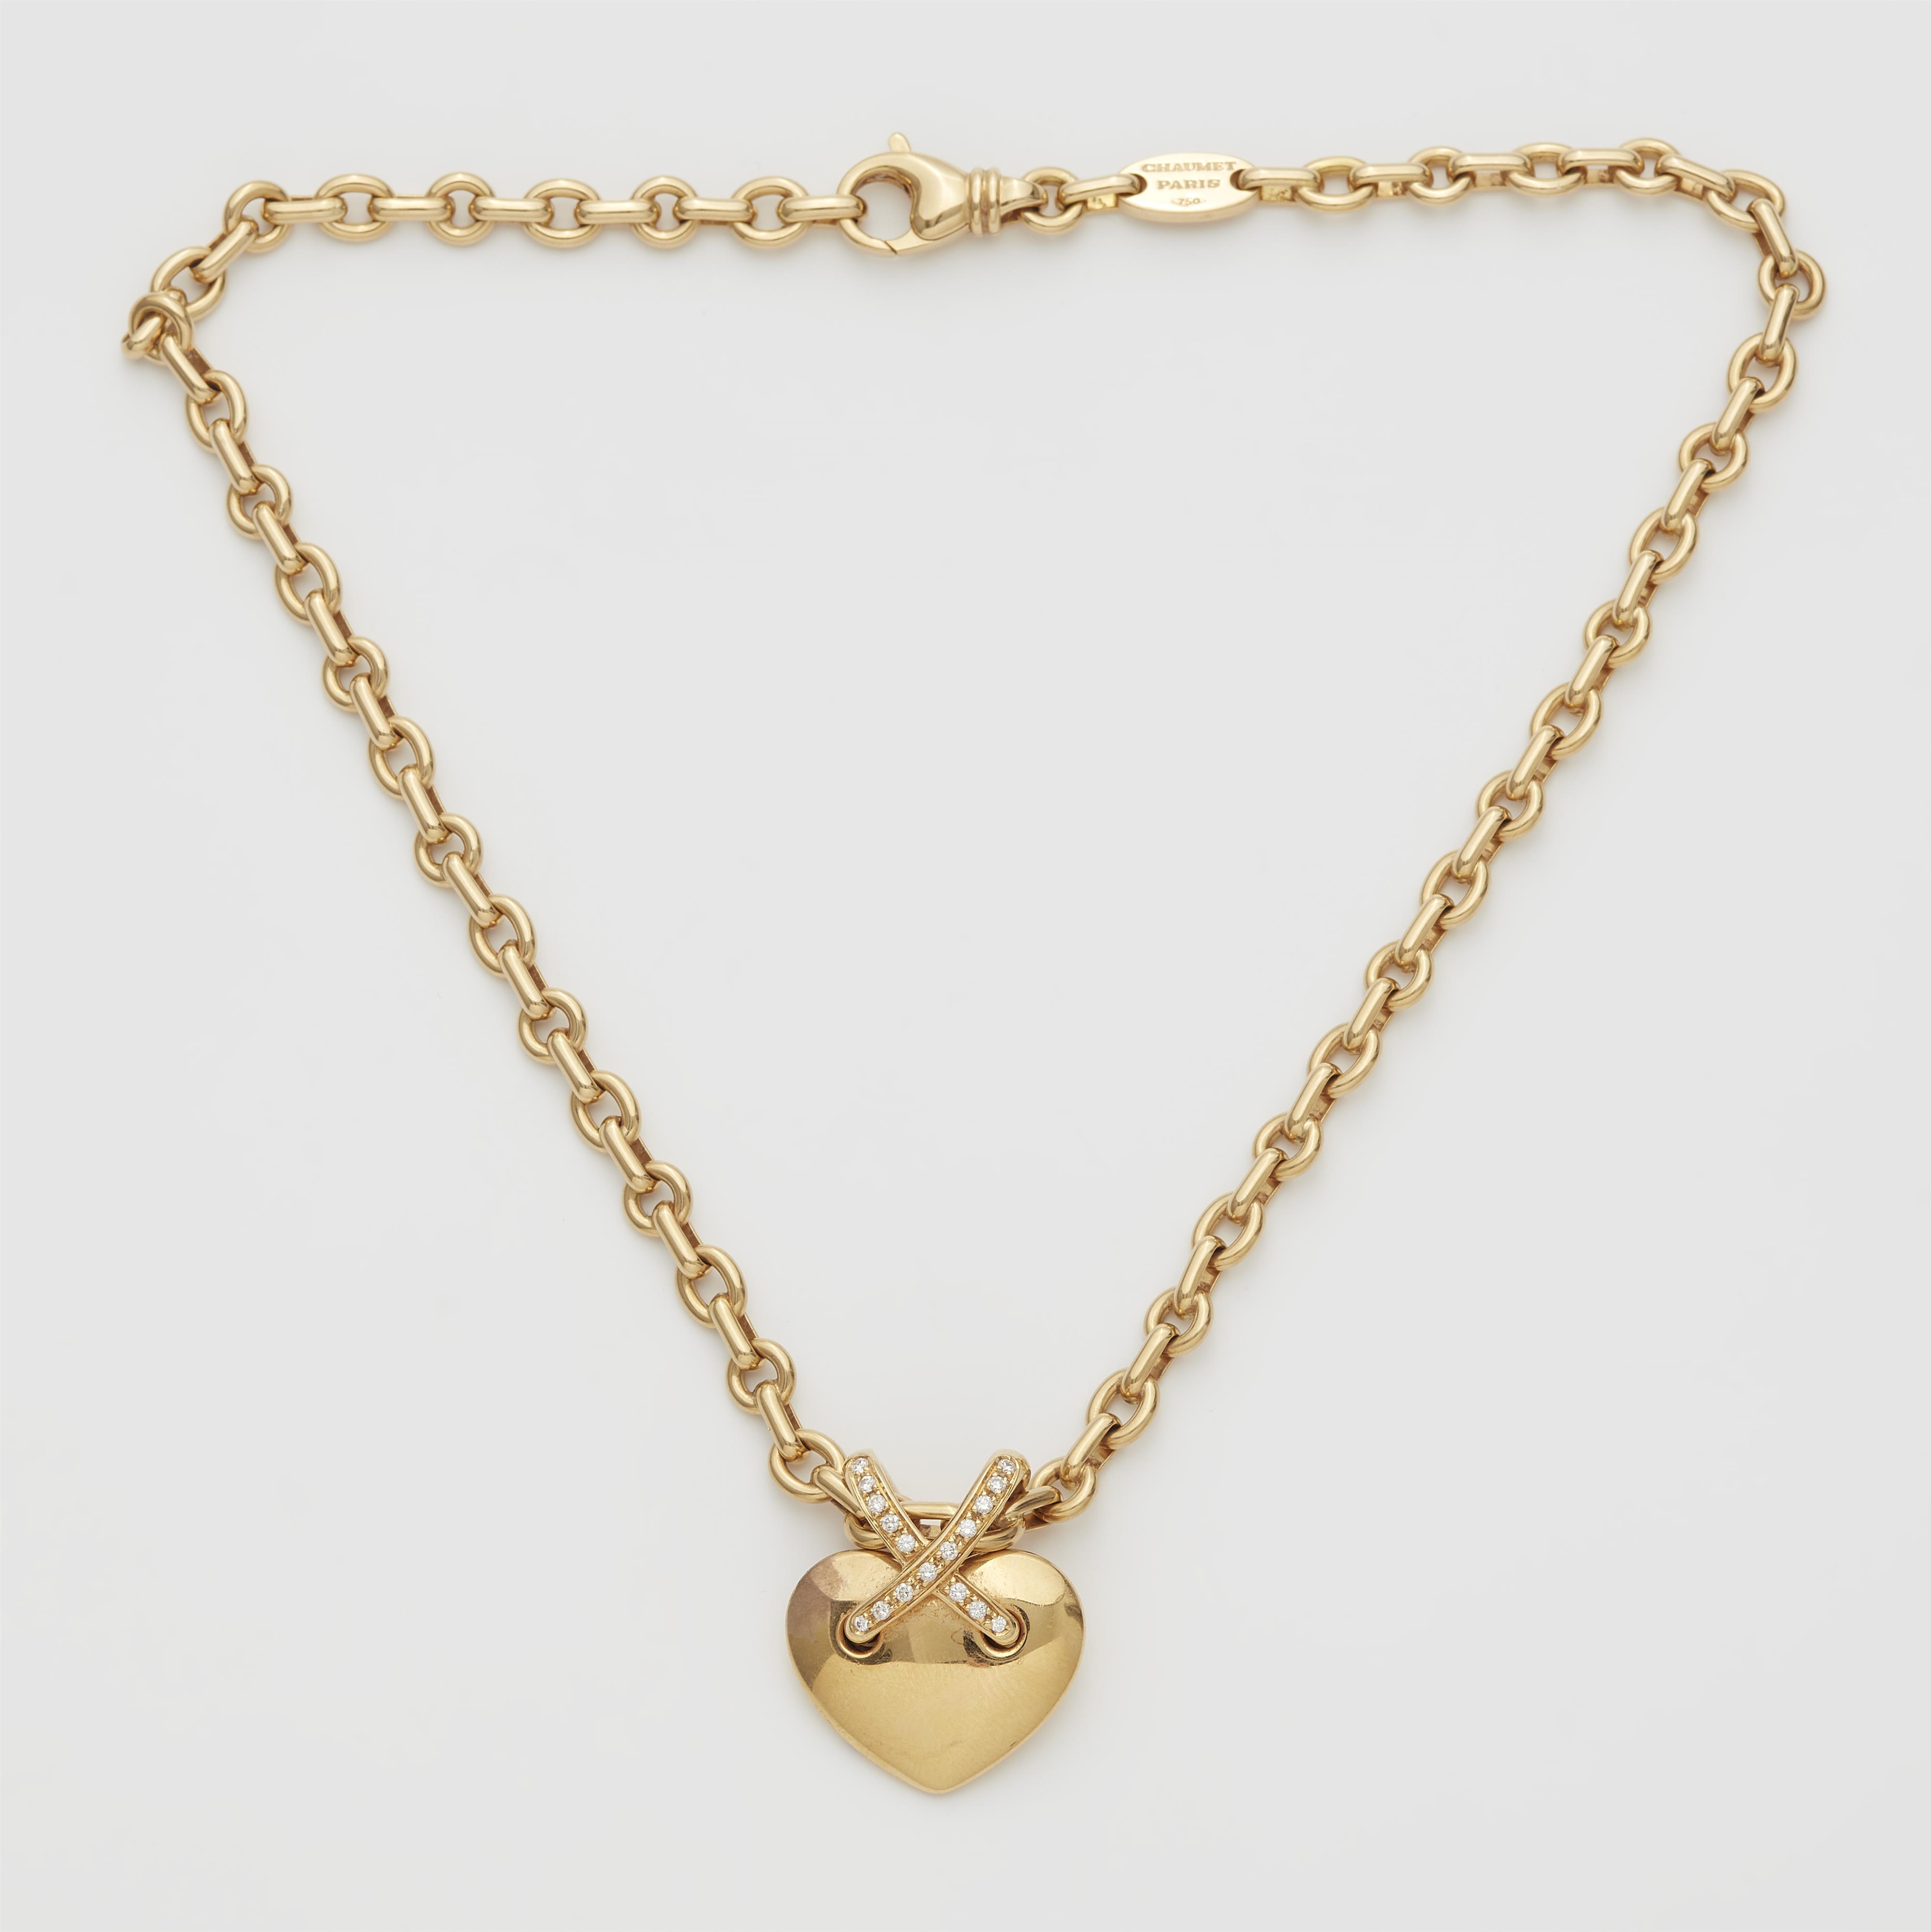 A French 18k gold and diamond link necklace with "Liens croises" heart pendant. - 